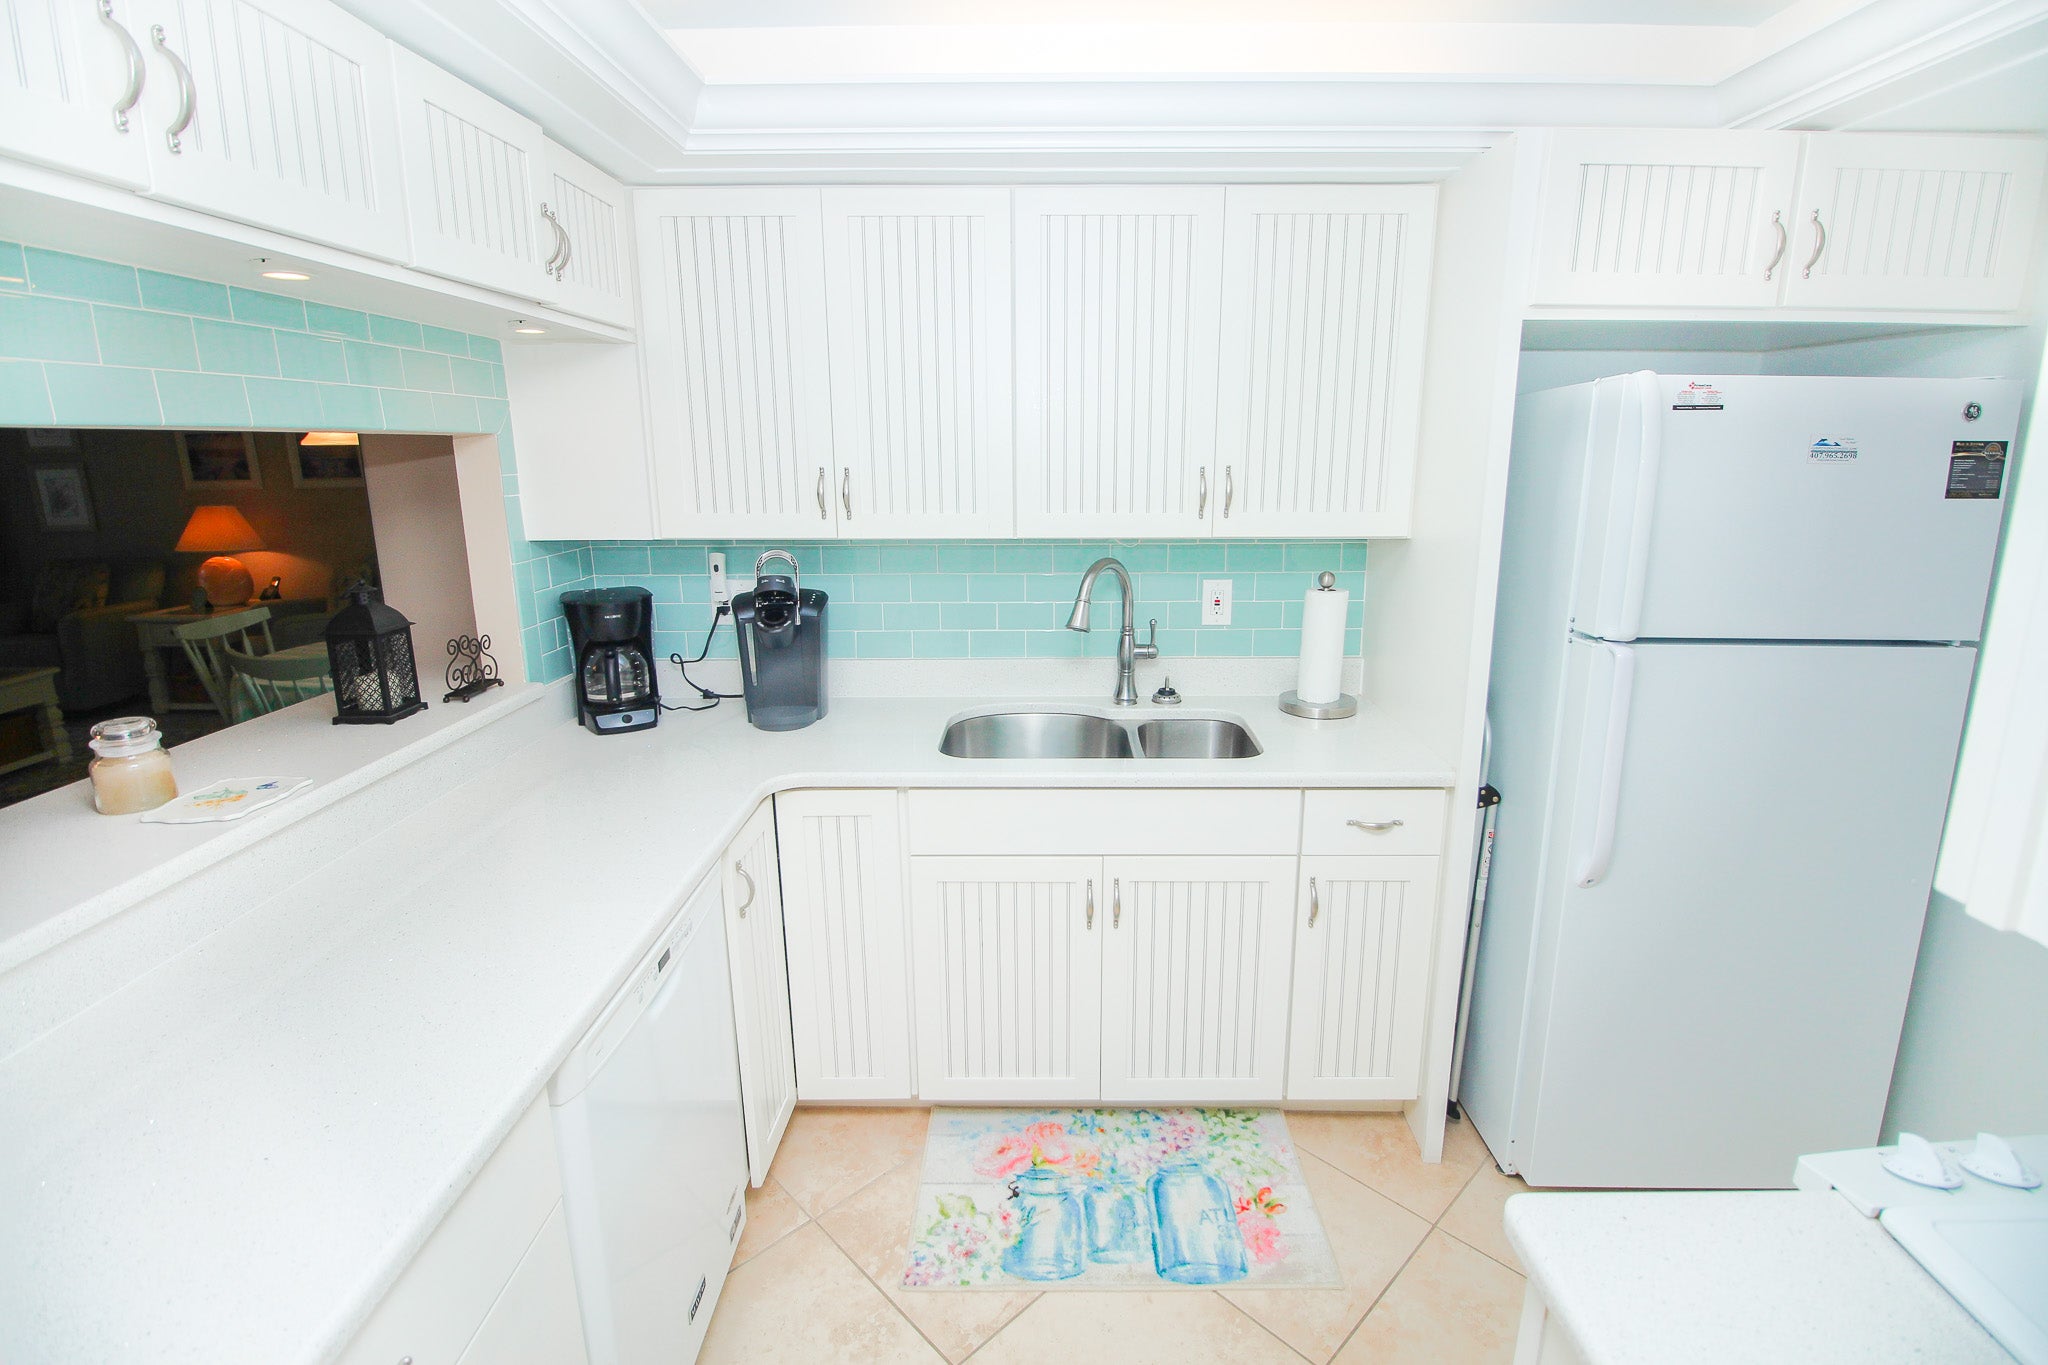 Kitchen with Teal Hues